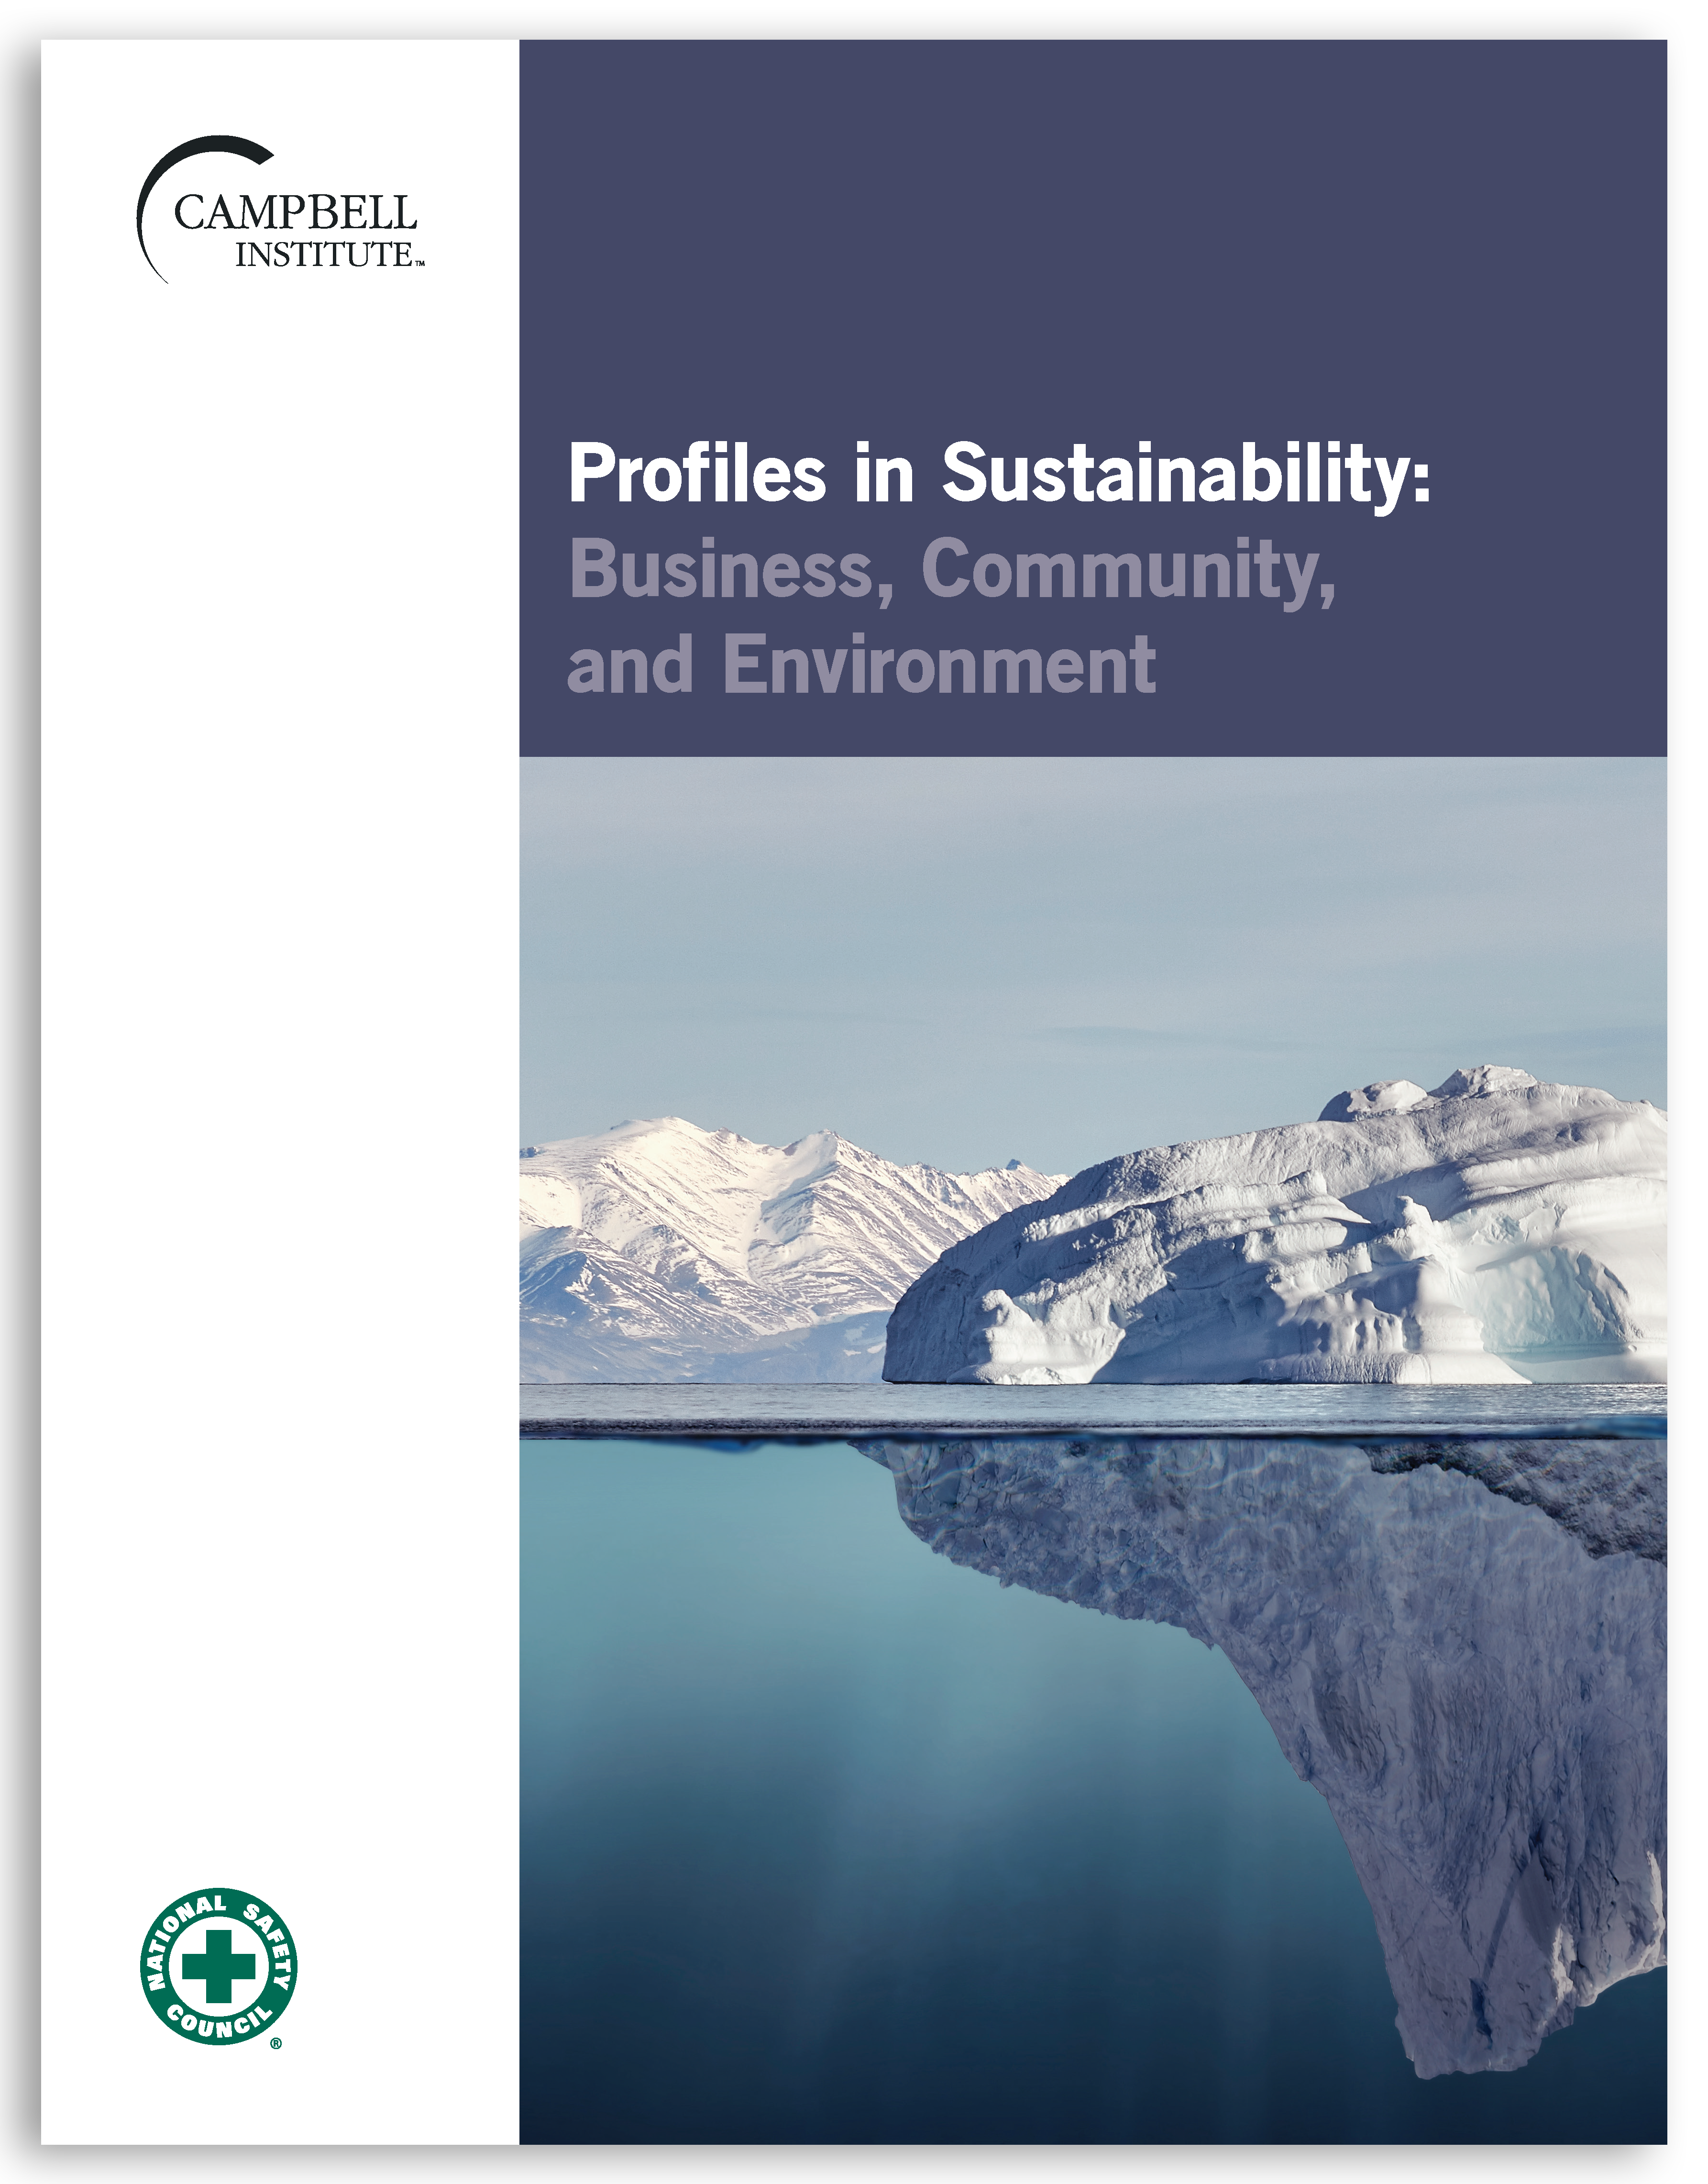 Profiles in Sustainability: Business, Community, and Environment